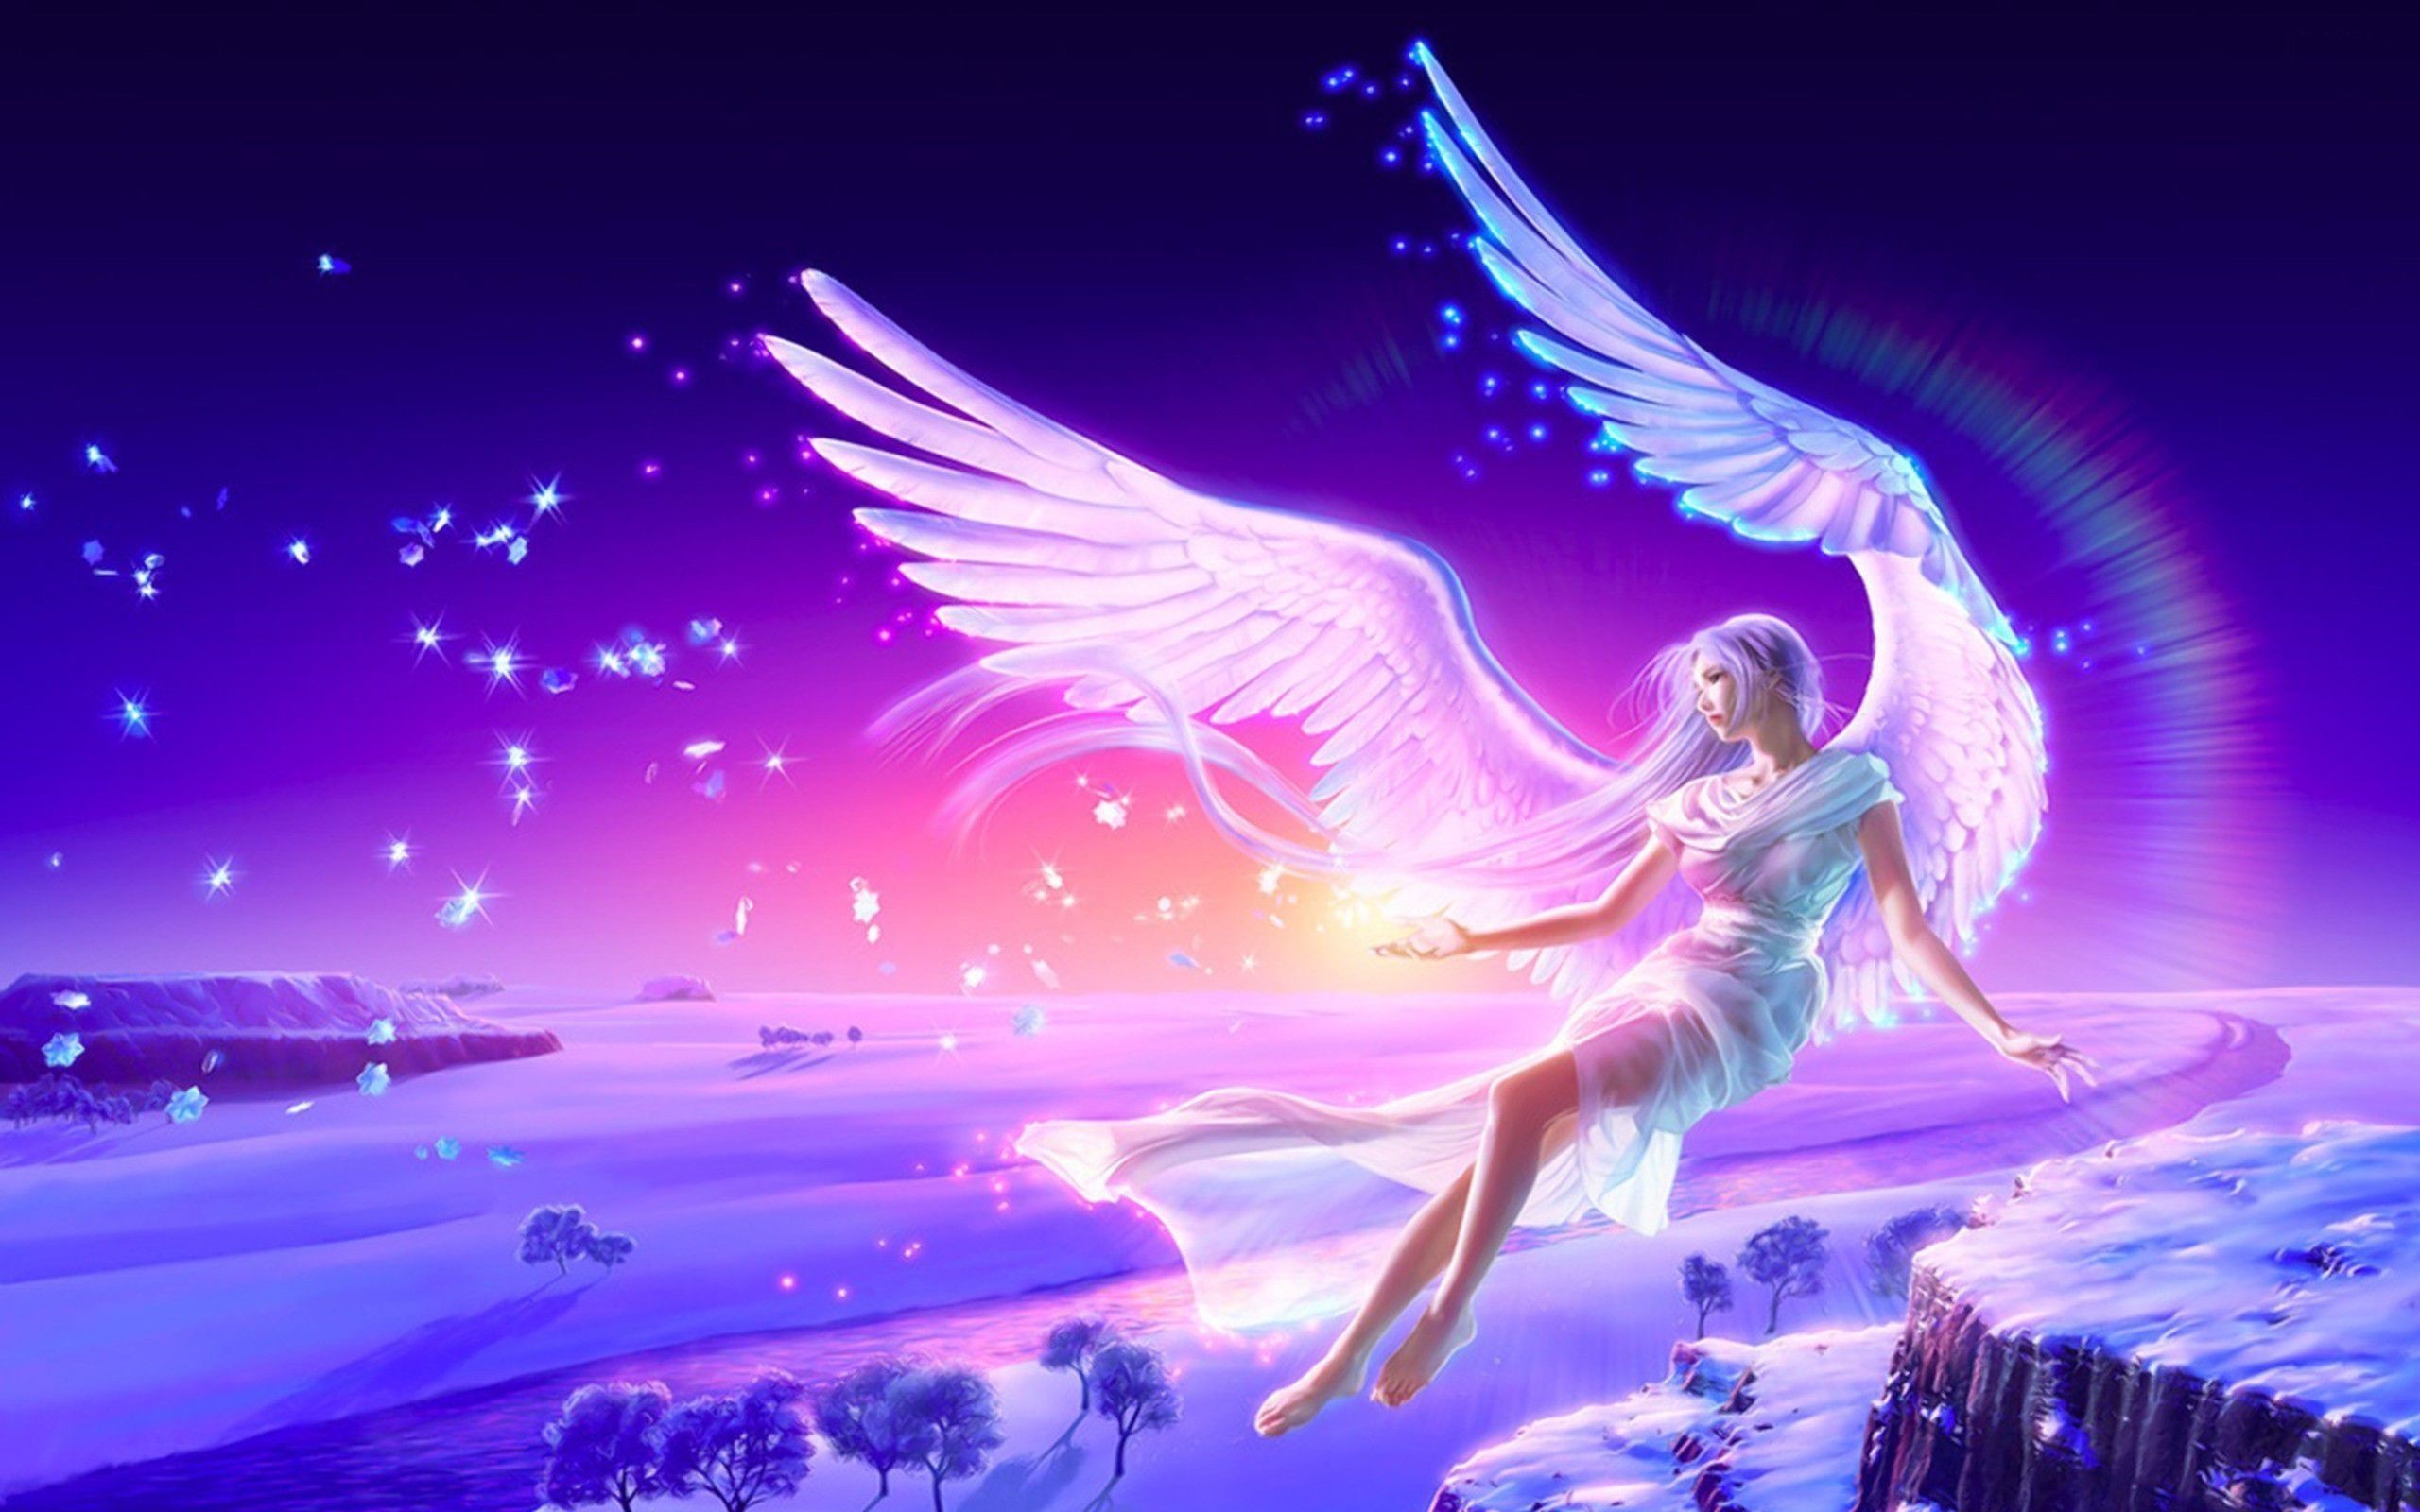 2560x1600 Anime Angels Wallpapers | New Anime Angel Full HD Wallpaper #4764 | Just  another High Quality .